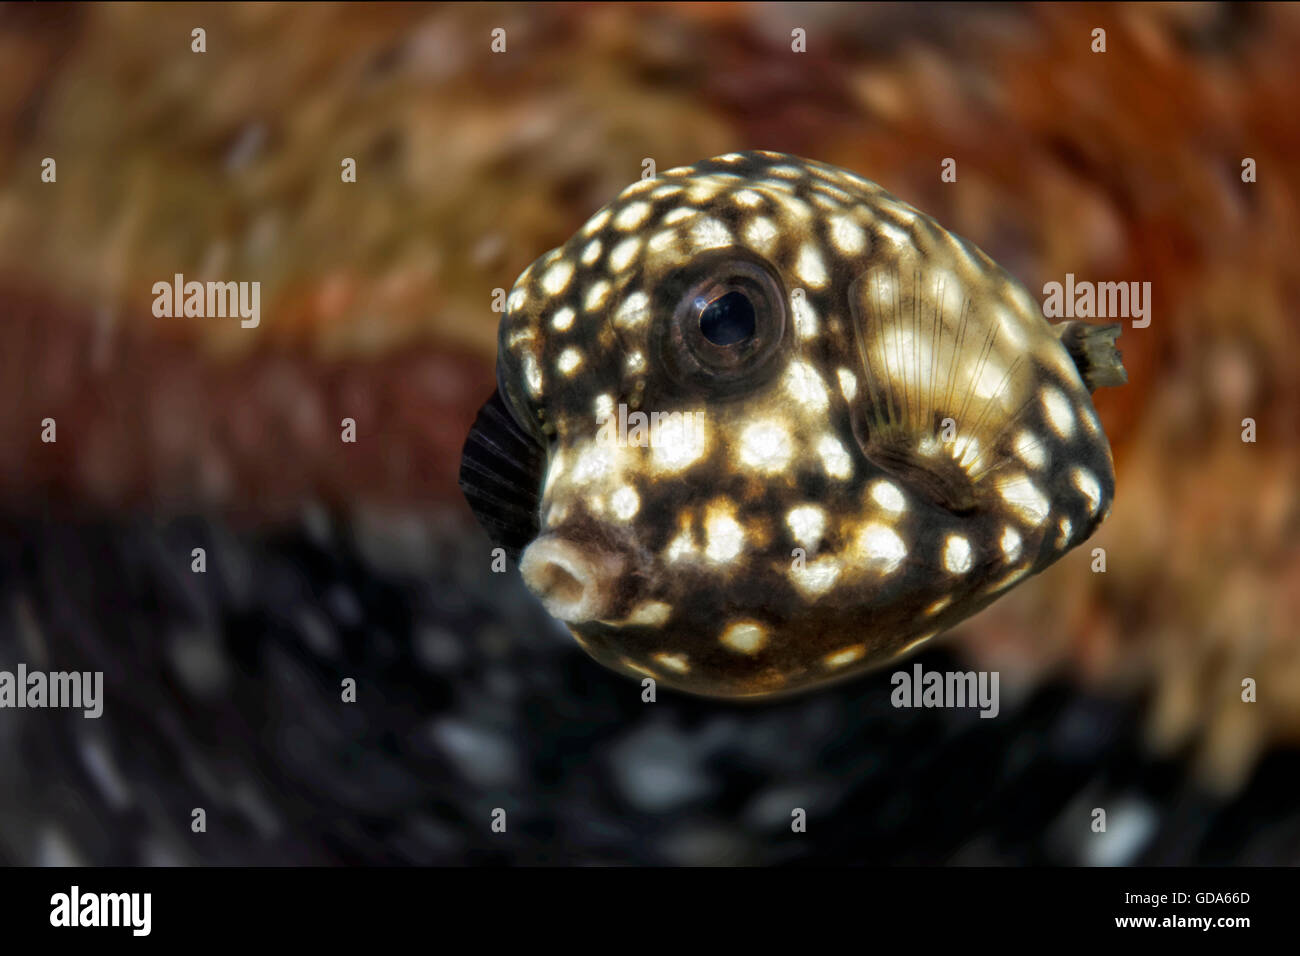 Juvenile Smooth Trunkfish, Lactophrys triqueter, Caribbean Sea, Barbados Stock Photo